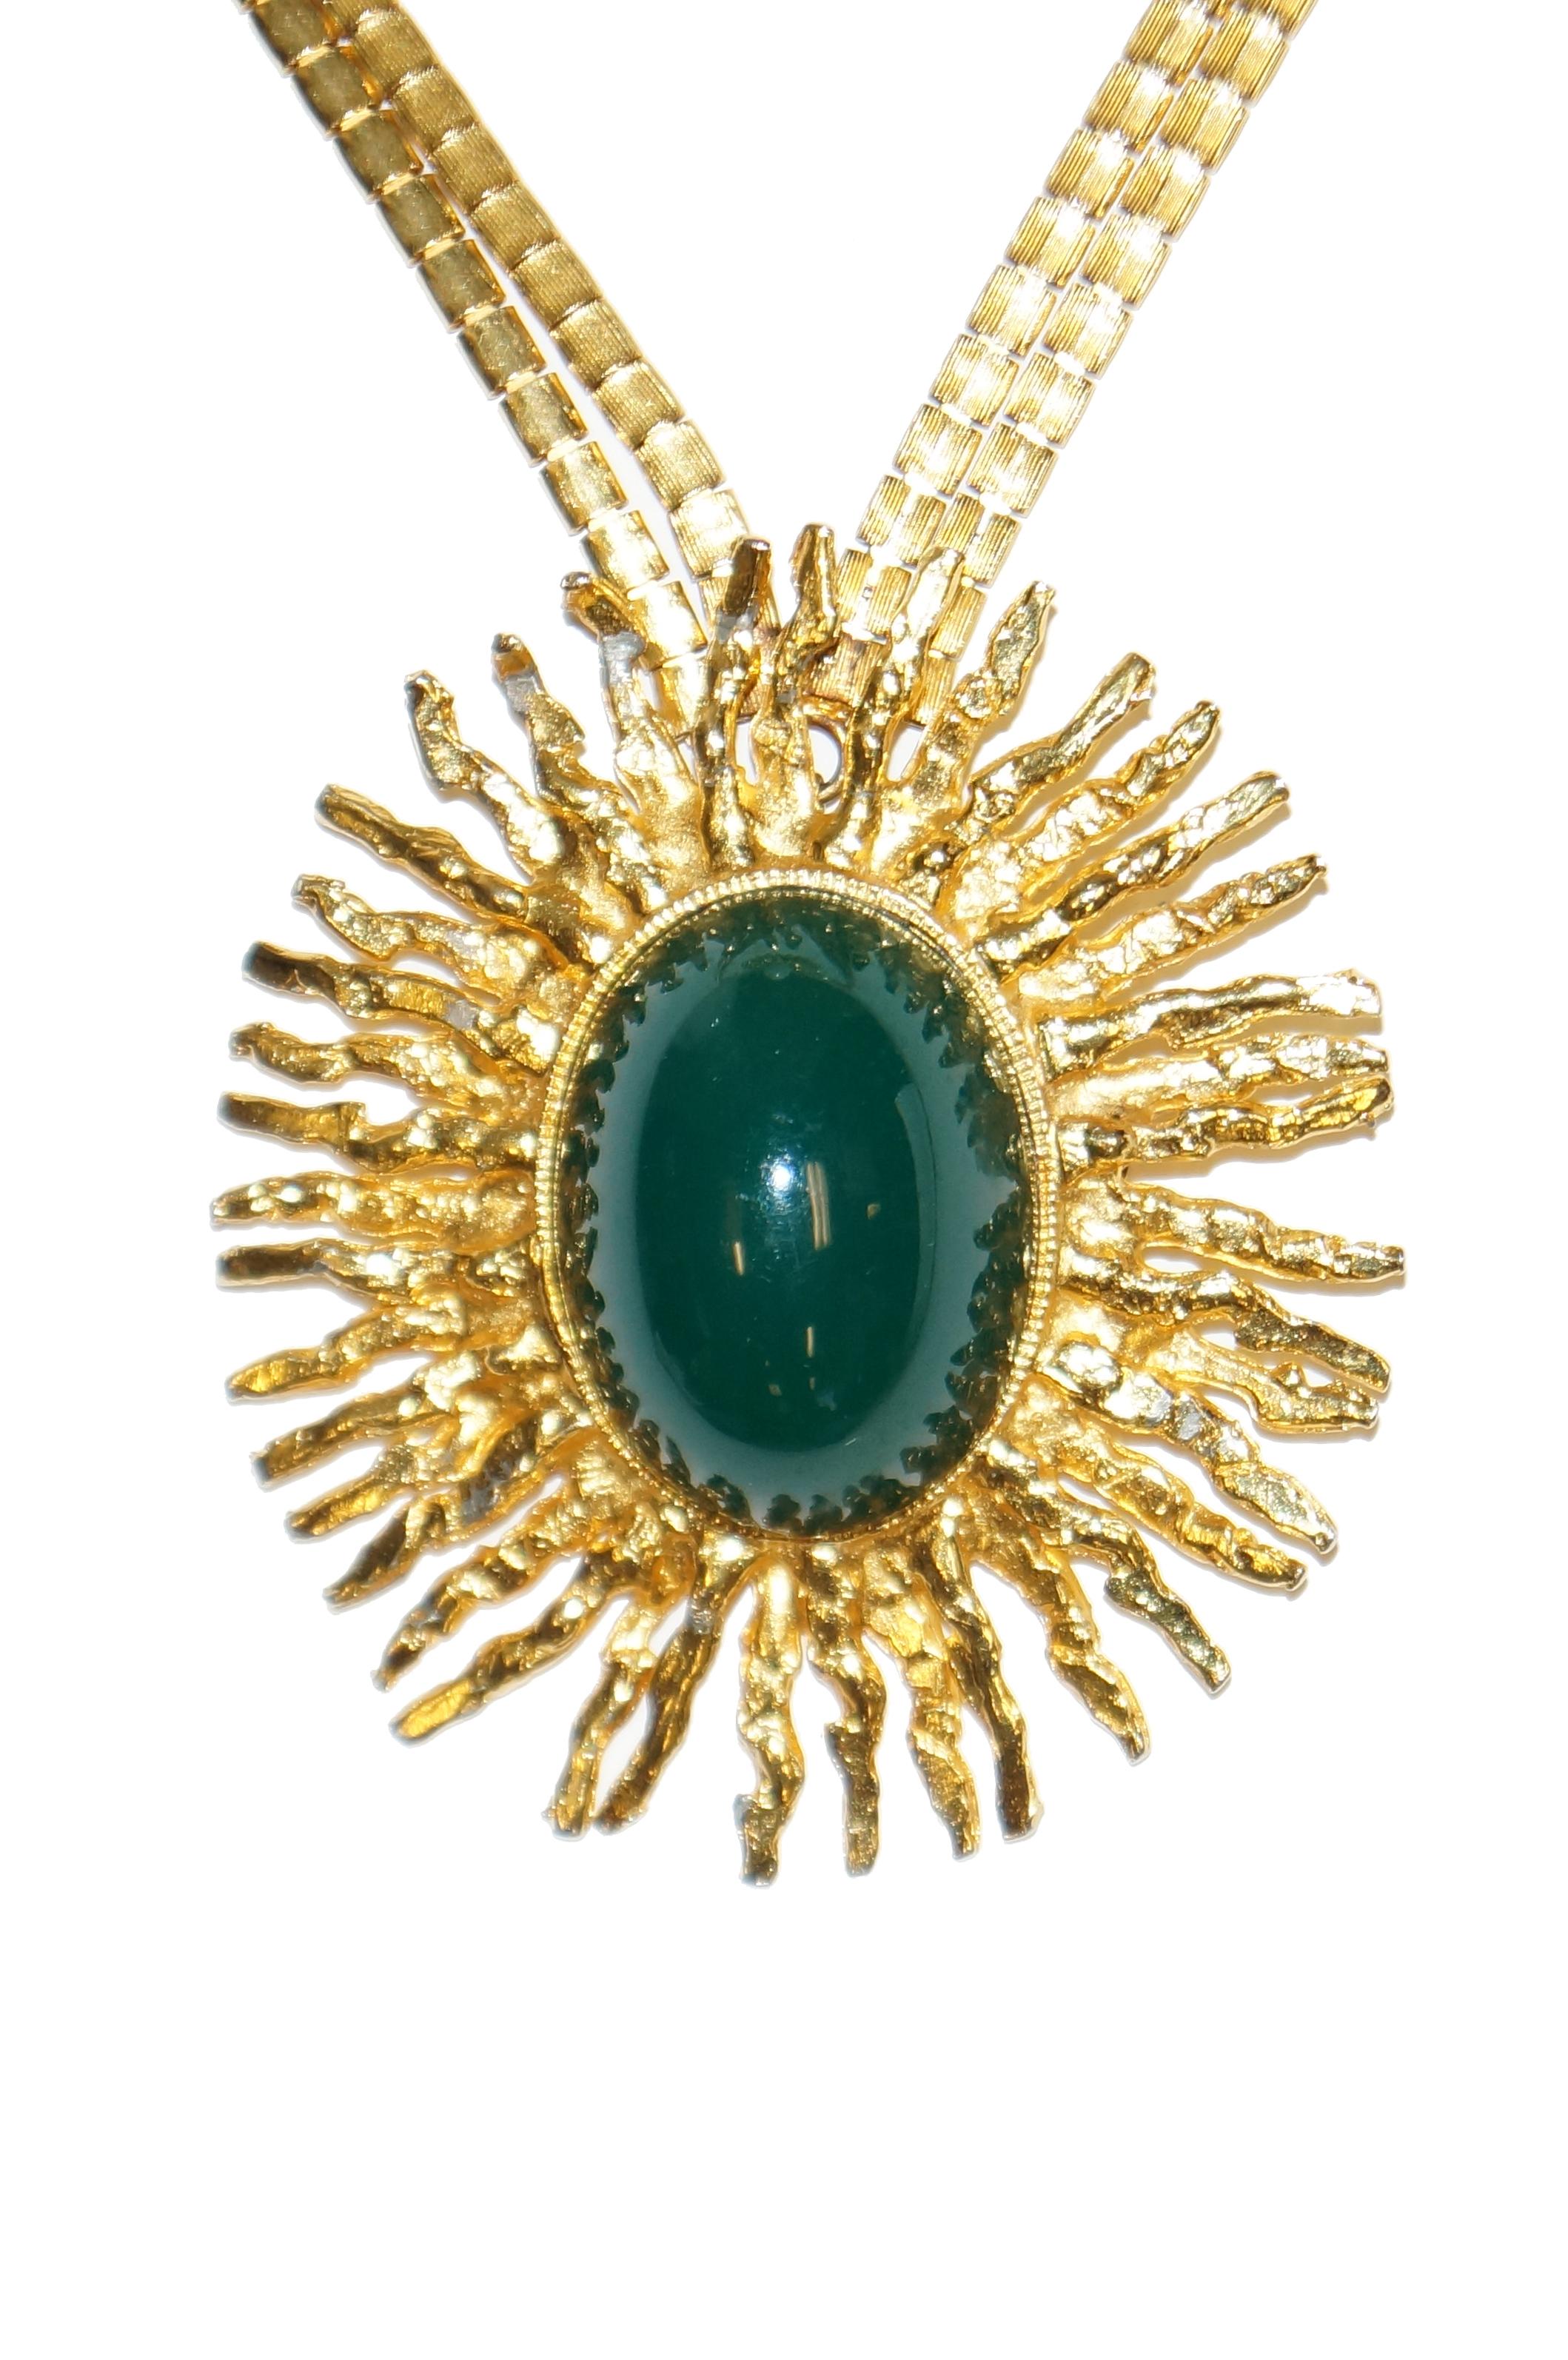 Designed by Robert Levy this 1960s necklace has two interchangeable sun burst pendants; one in green and one in white. The pendants are gold tone with large lucite centers and hammered sun bursts. The double horsetail chain hangs 11 inches but is 21